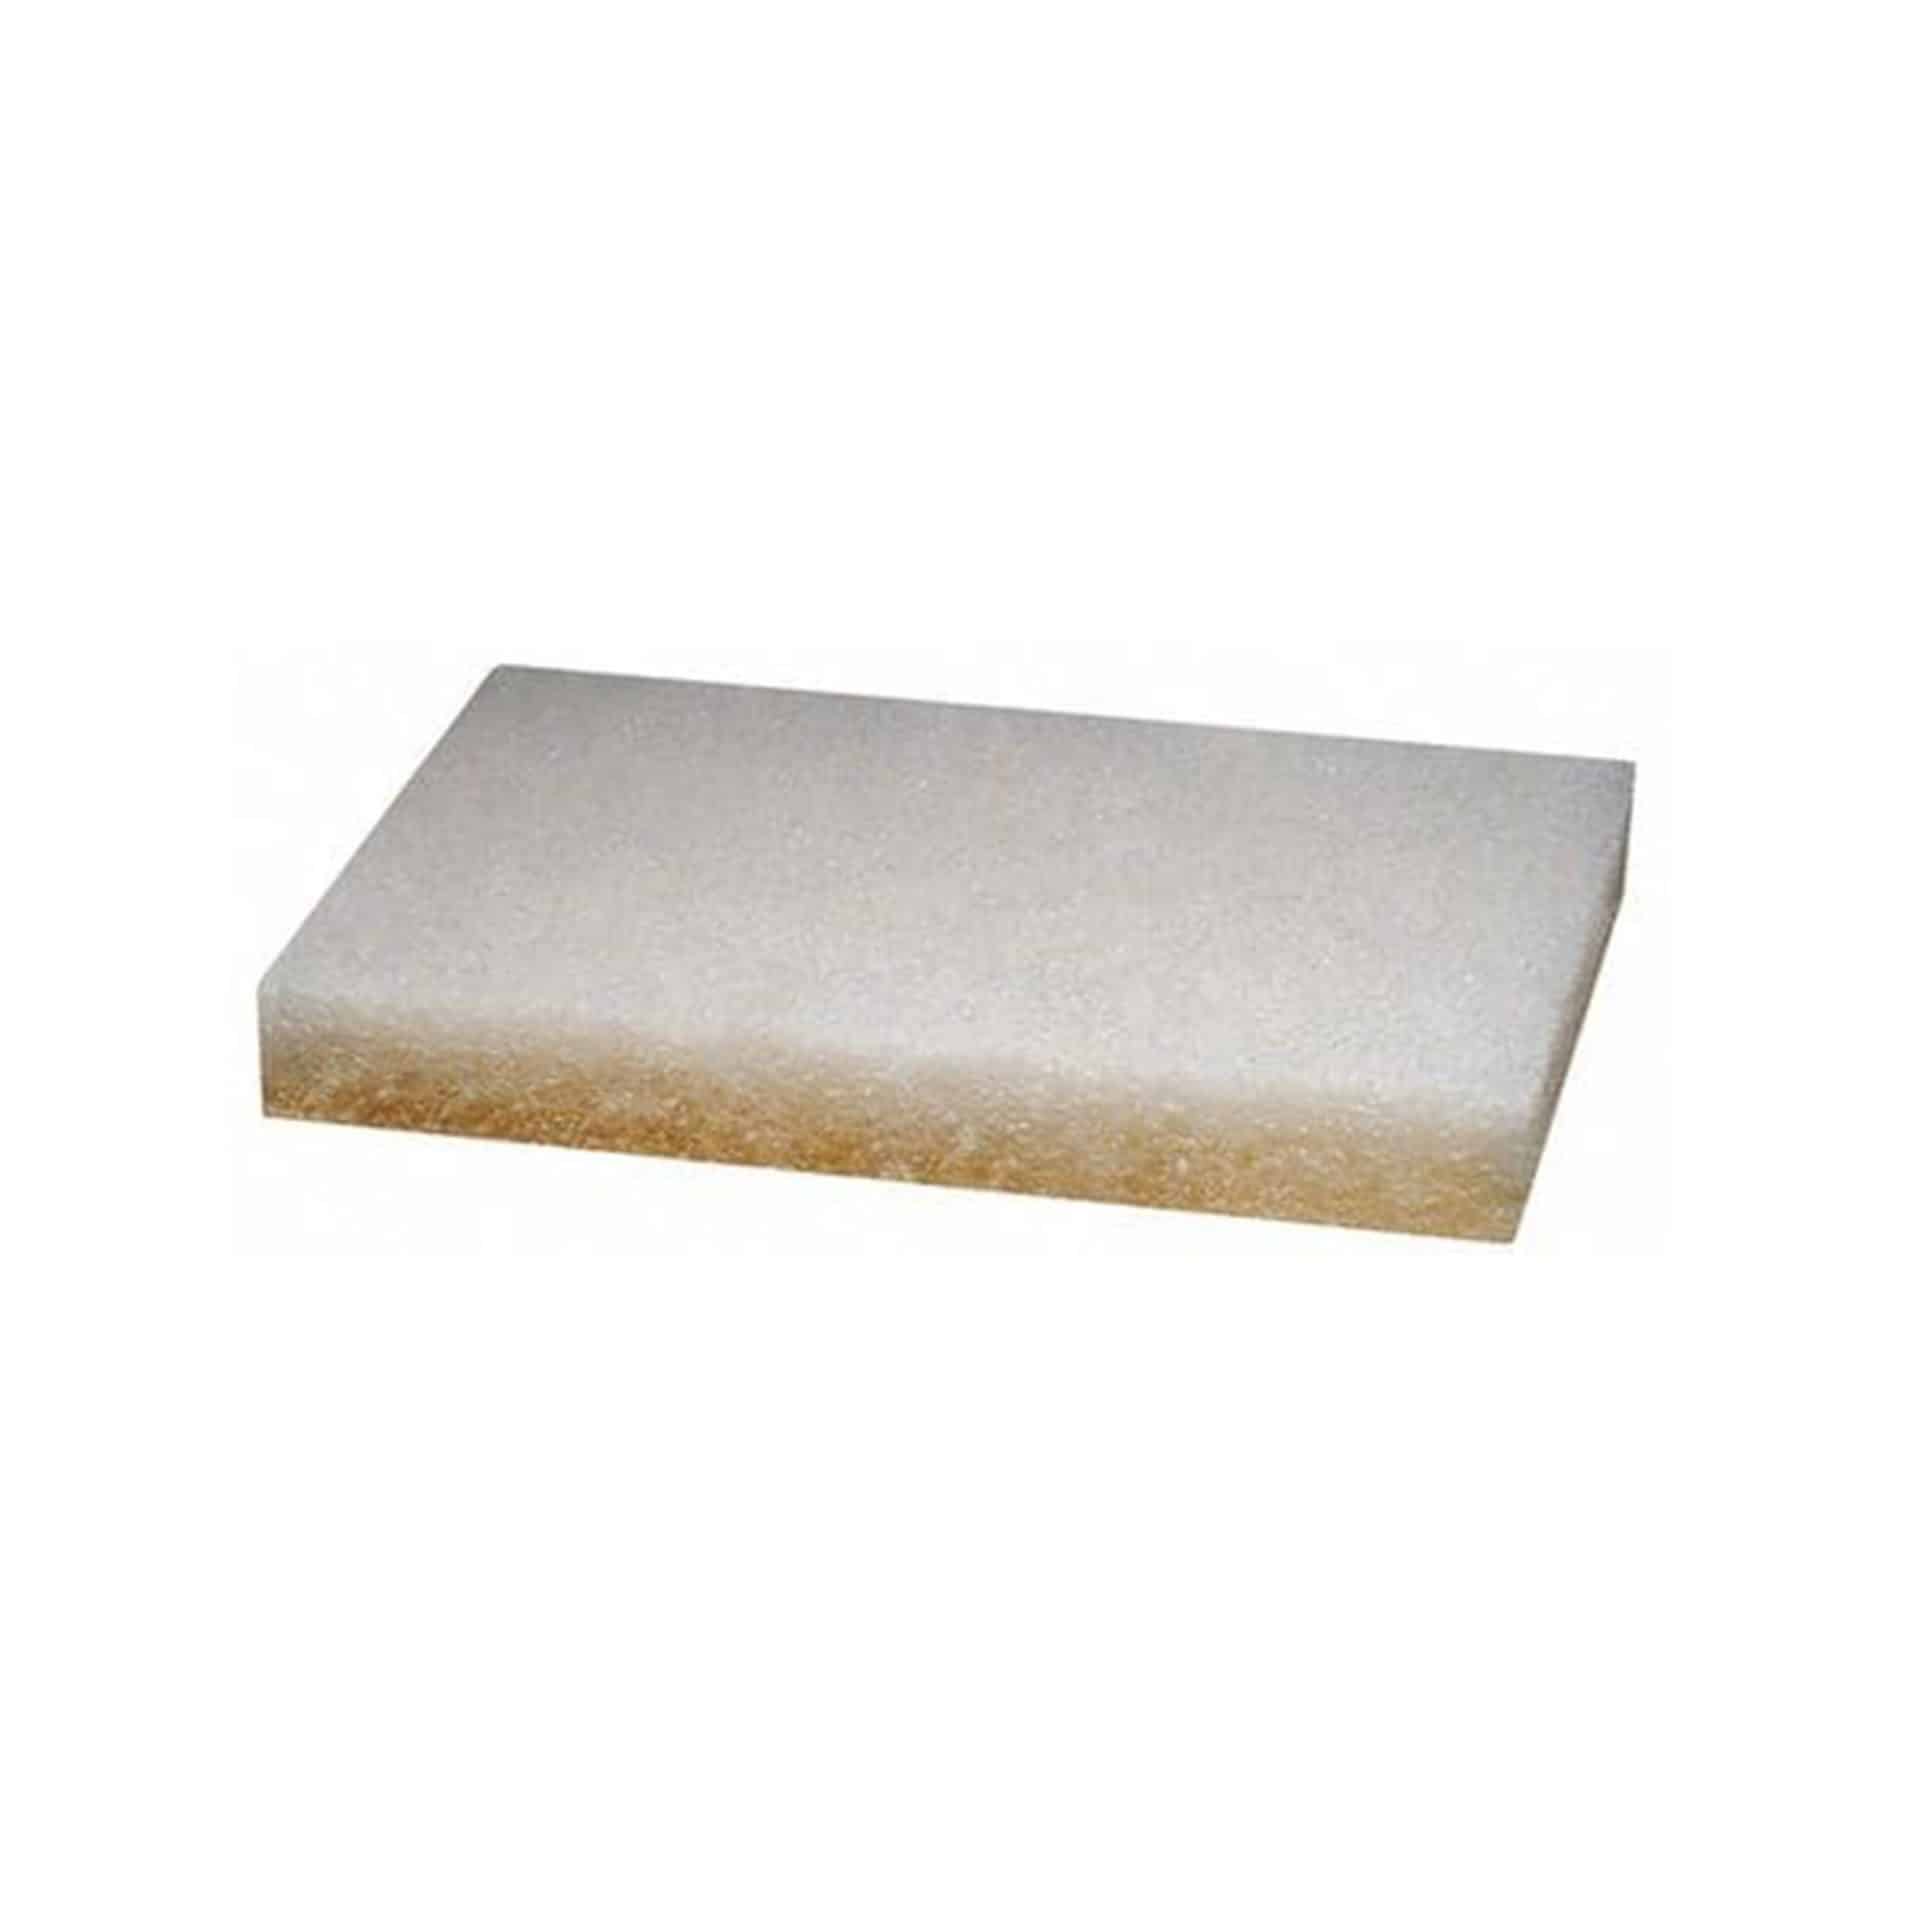 048011-33274 3M Aircraft Cleaning Pads Case of 50 PN 